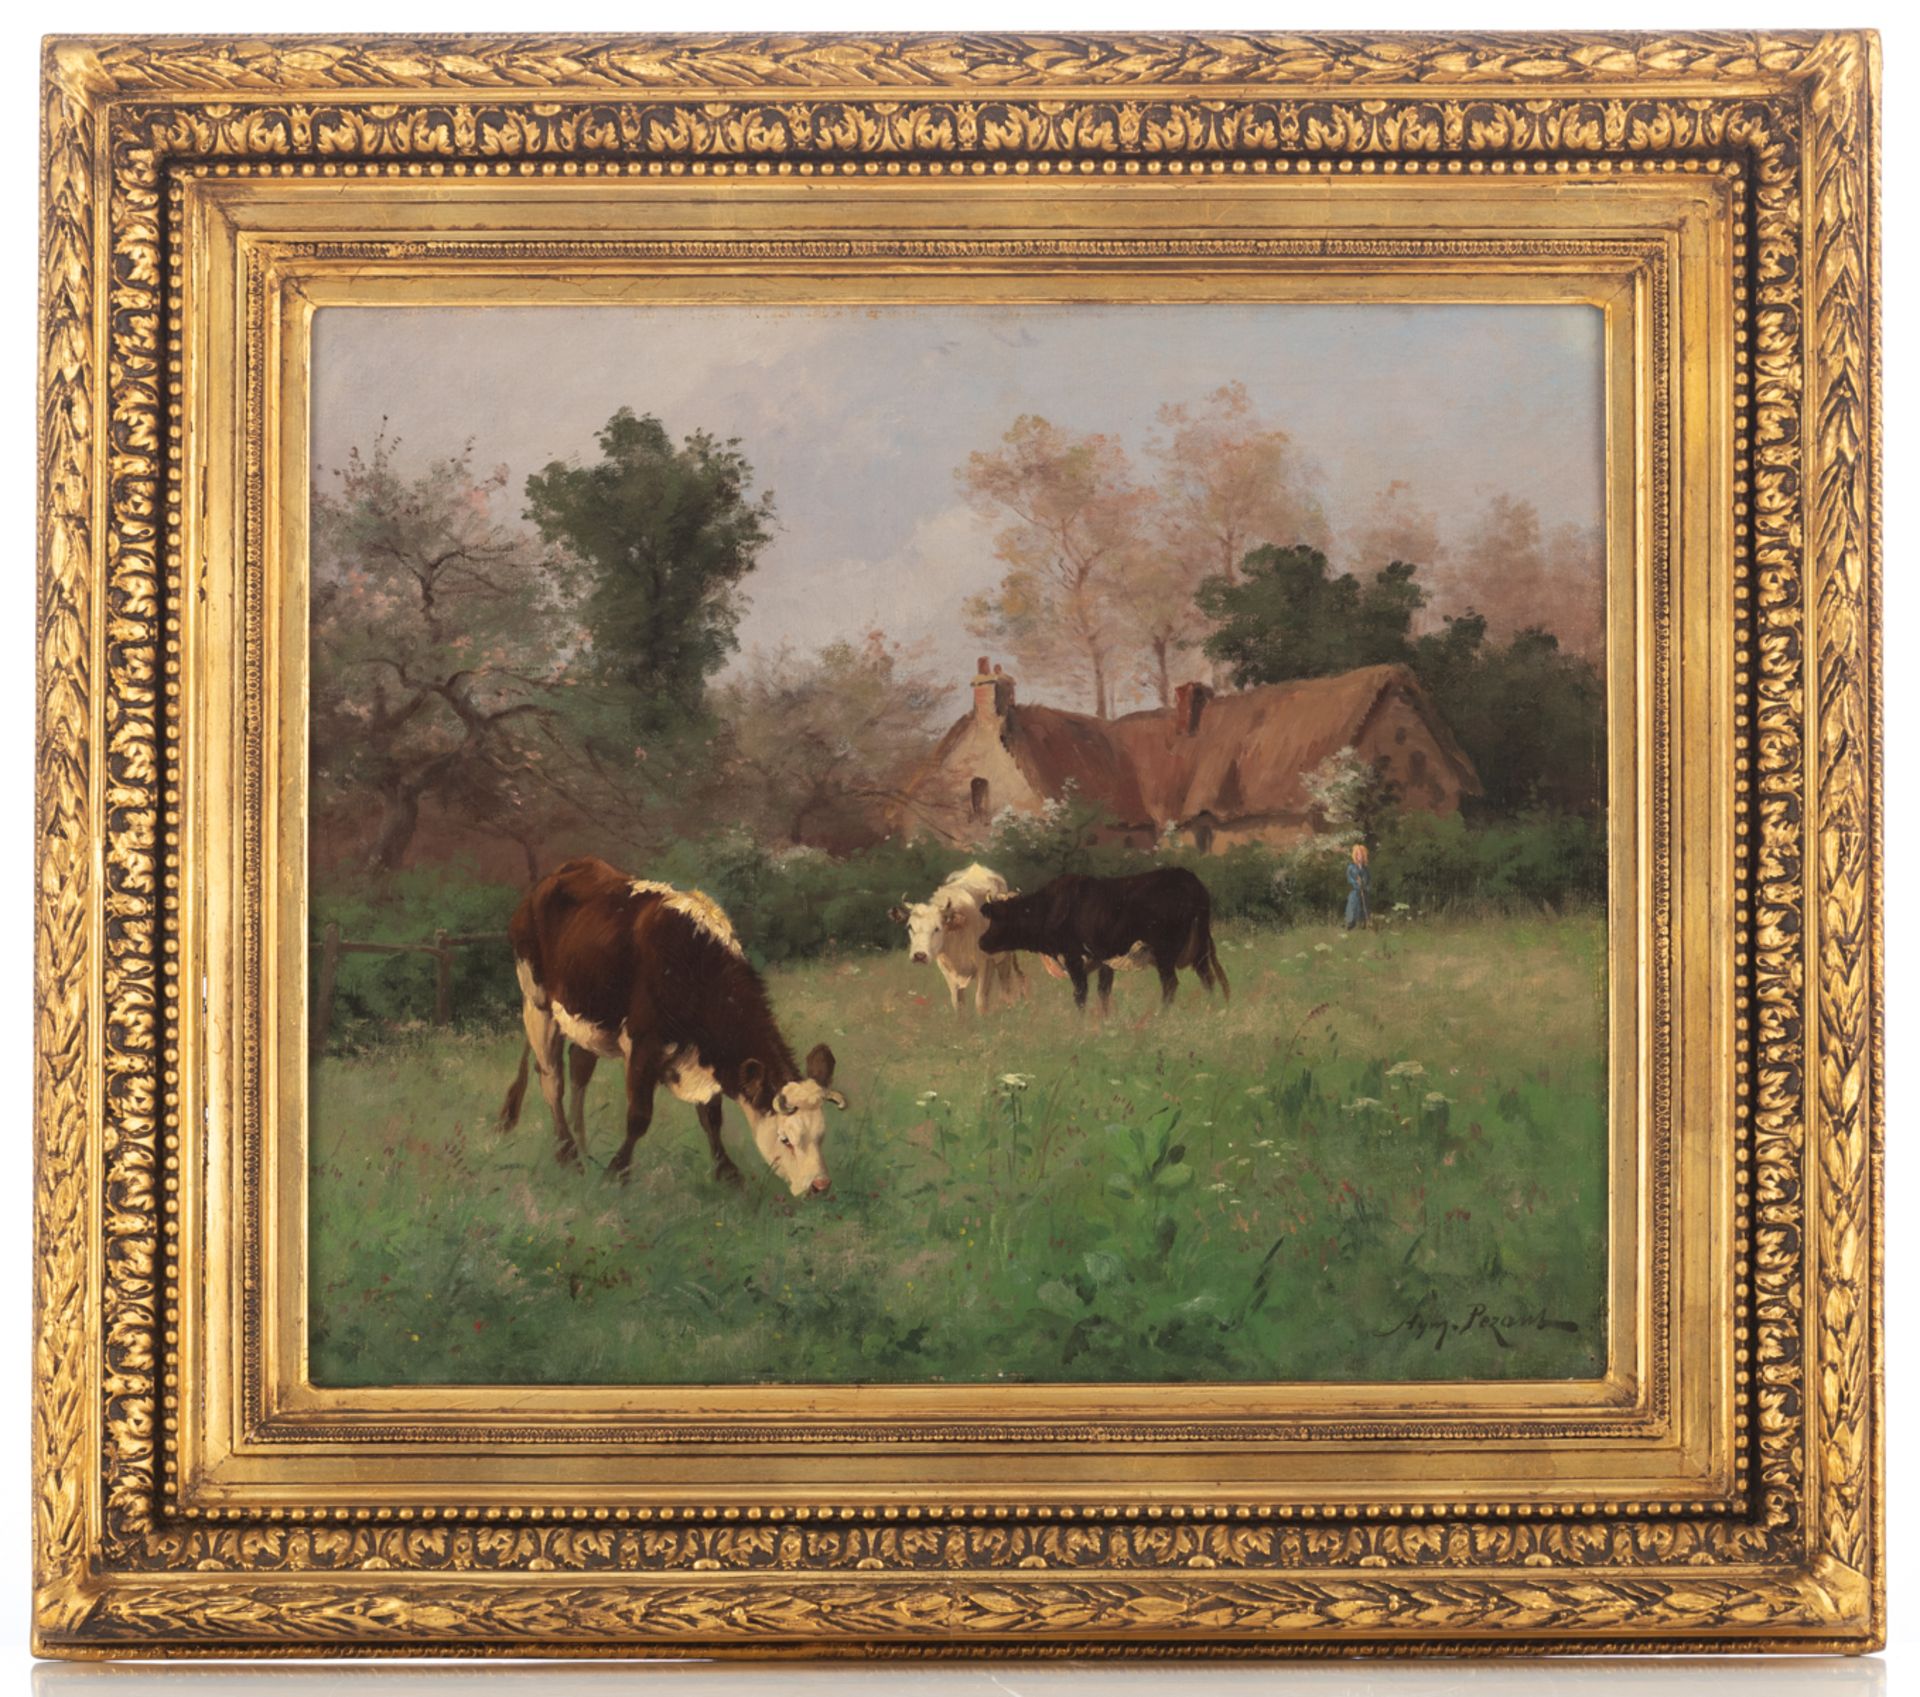 Pezant A., a pastoral view with grazing cows, oil on canvas, 54 x 65 cm - Image 2 of 4